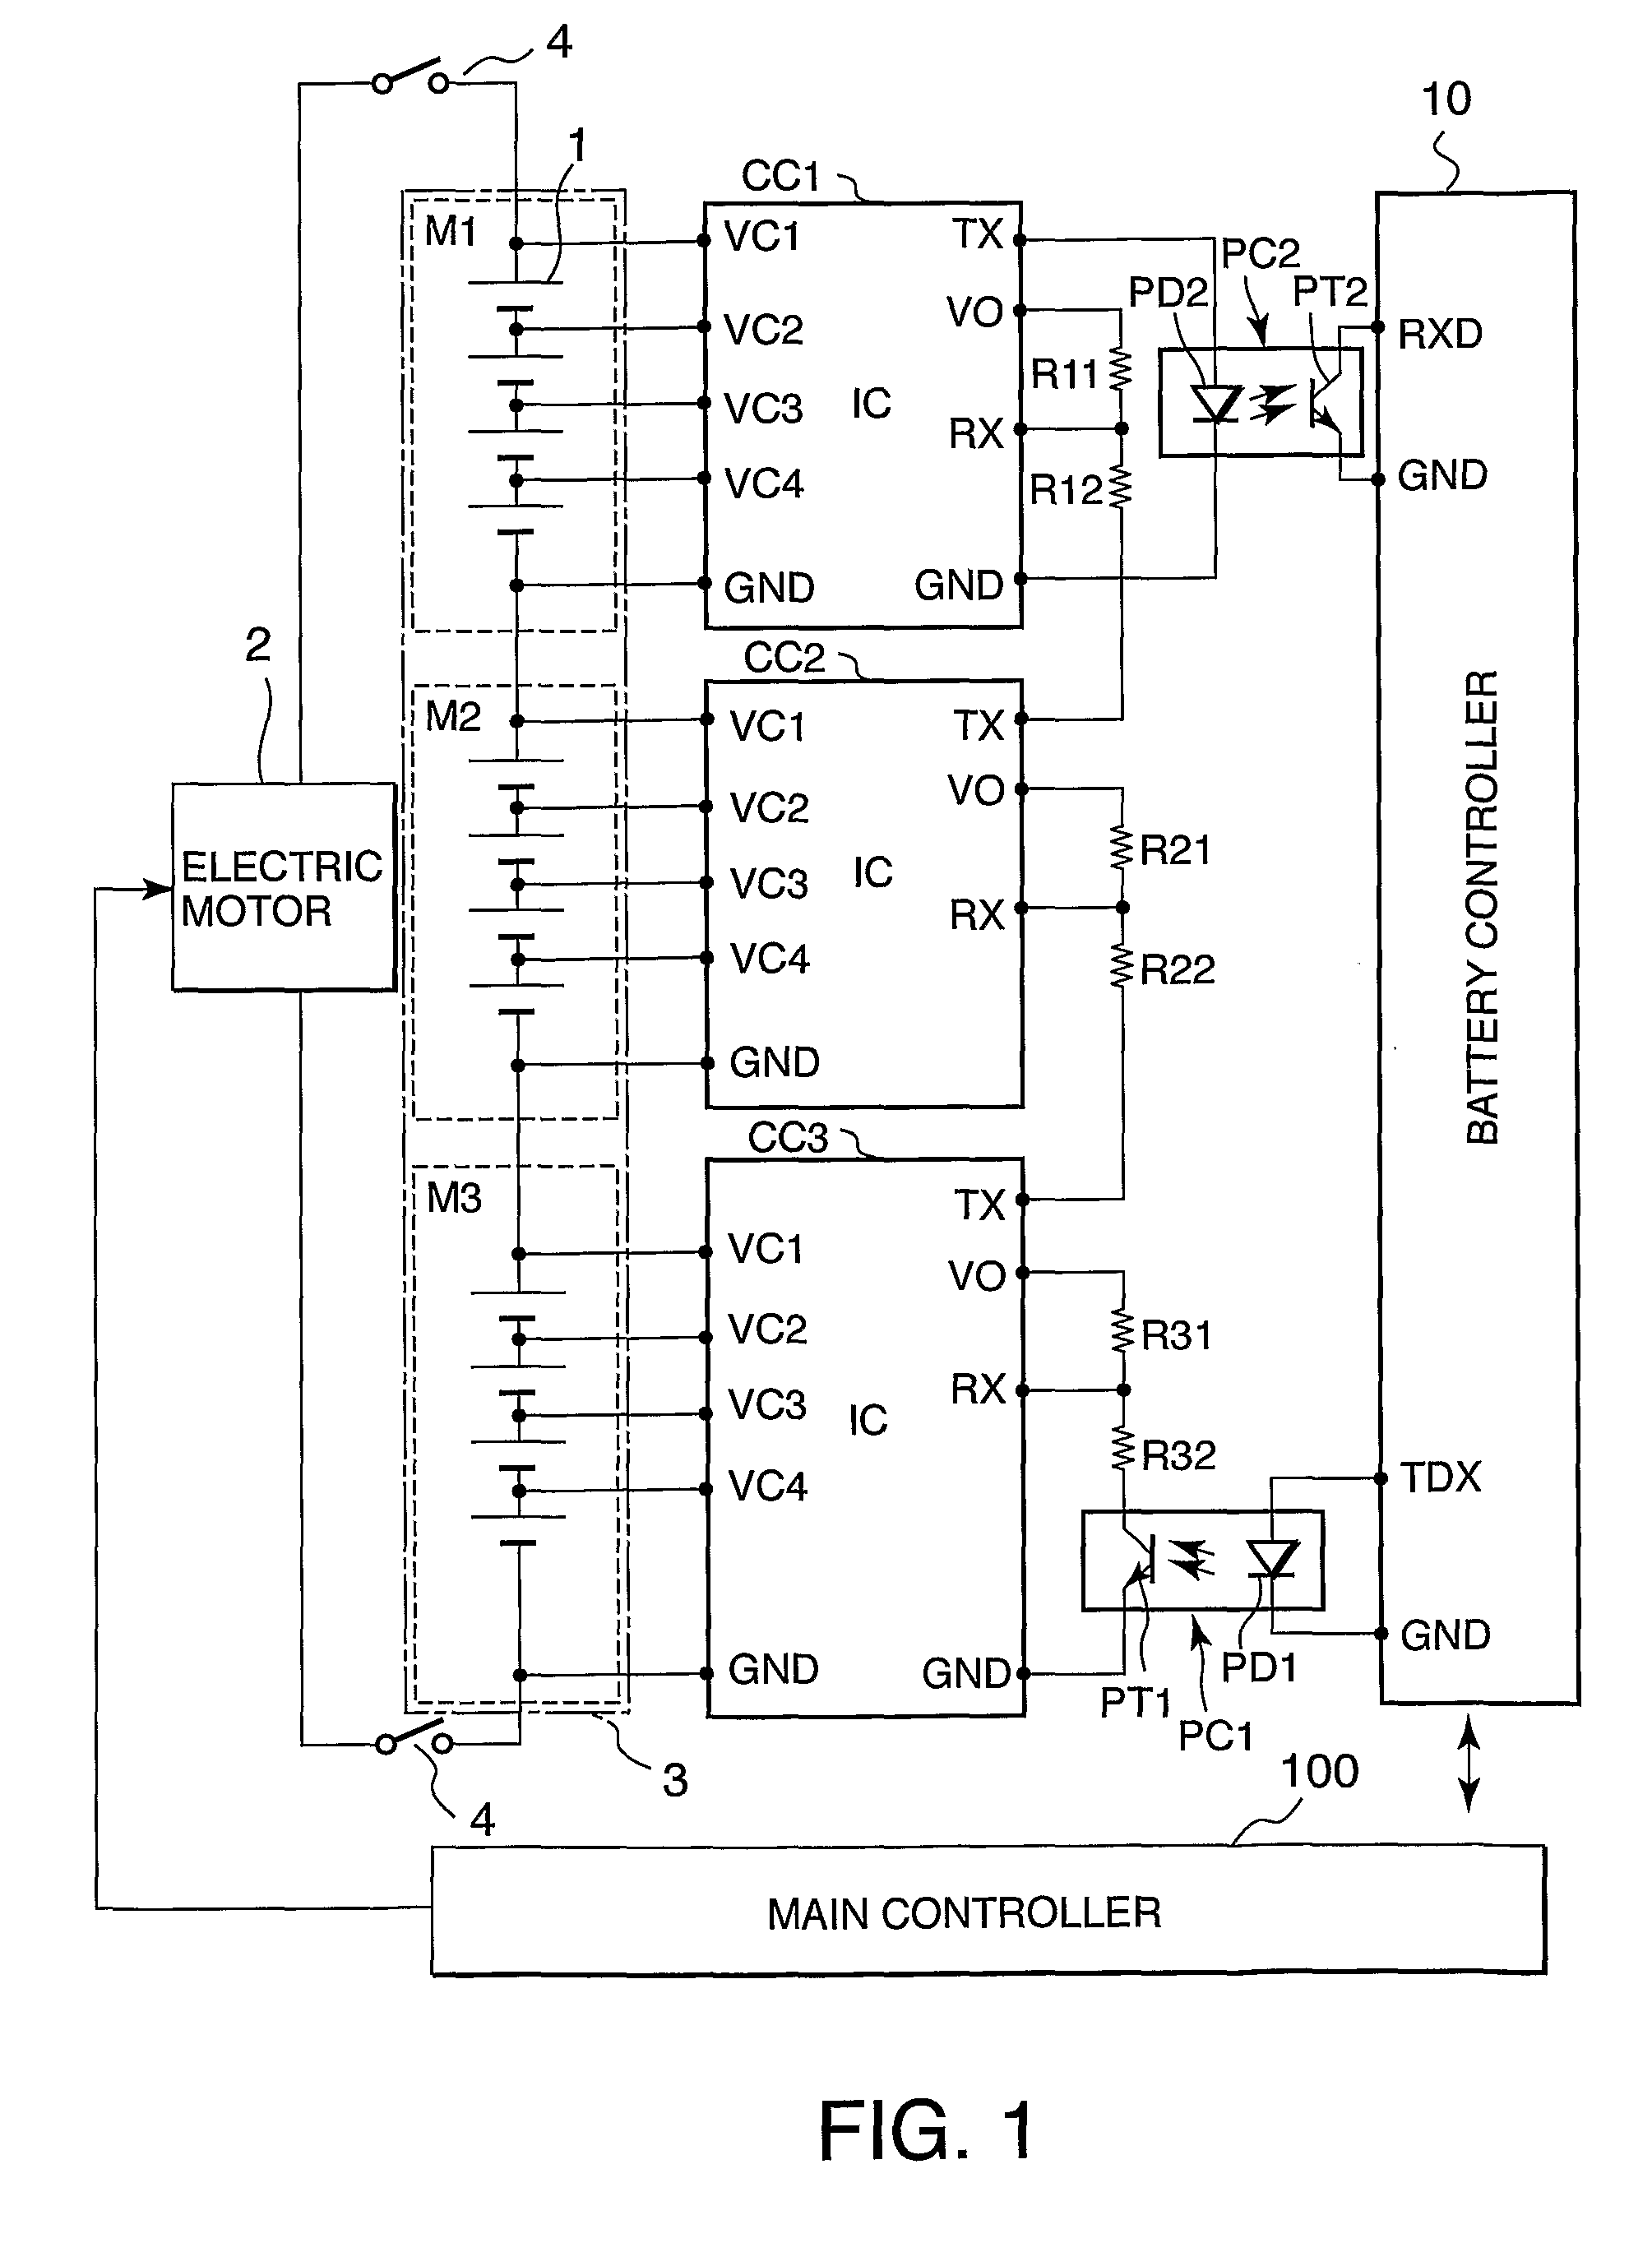 Battery voltage monitoring device